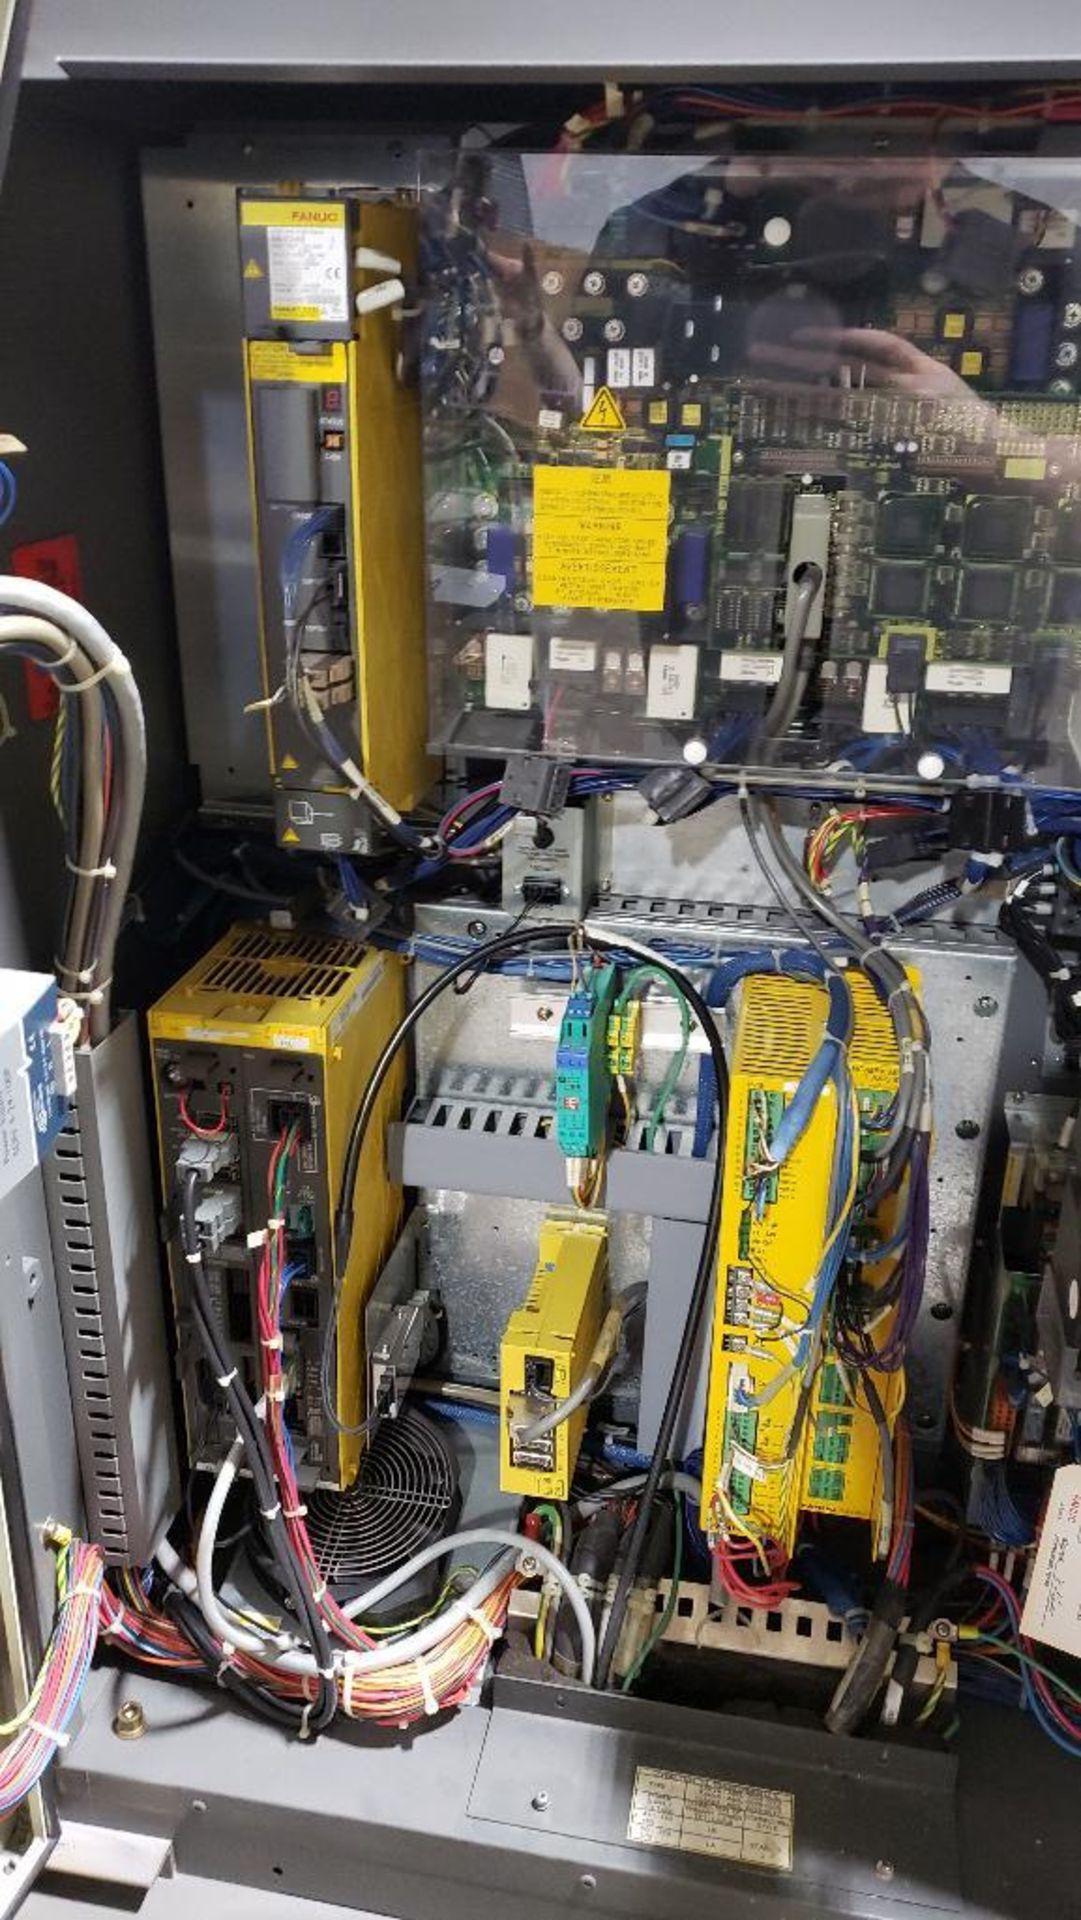 Fanuc R-2000iA/200F robot with Fanuc System R-J3iB controller. - Image 12 of 13